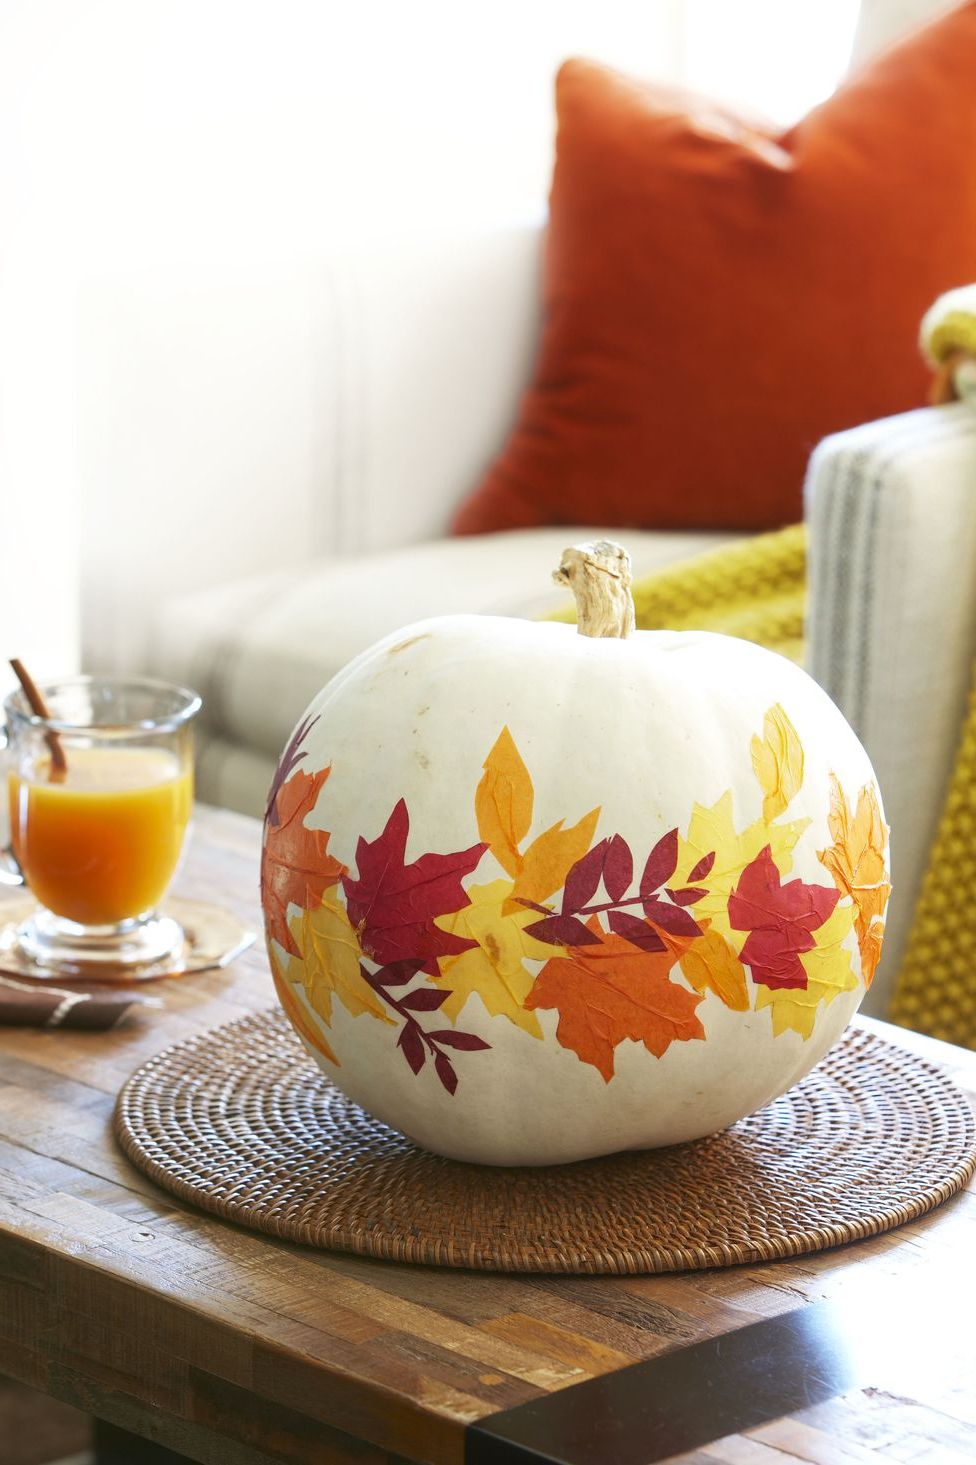 20 EASY FALL CRAFTS FOR SENIORS: FUN AND EXCITING IDEAS